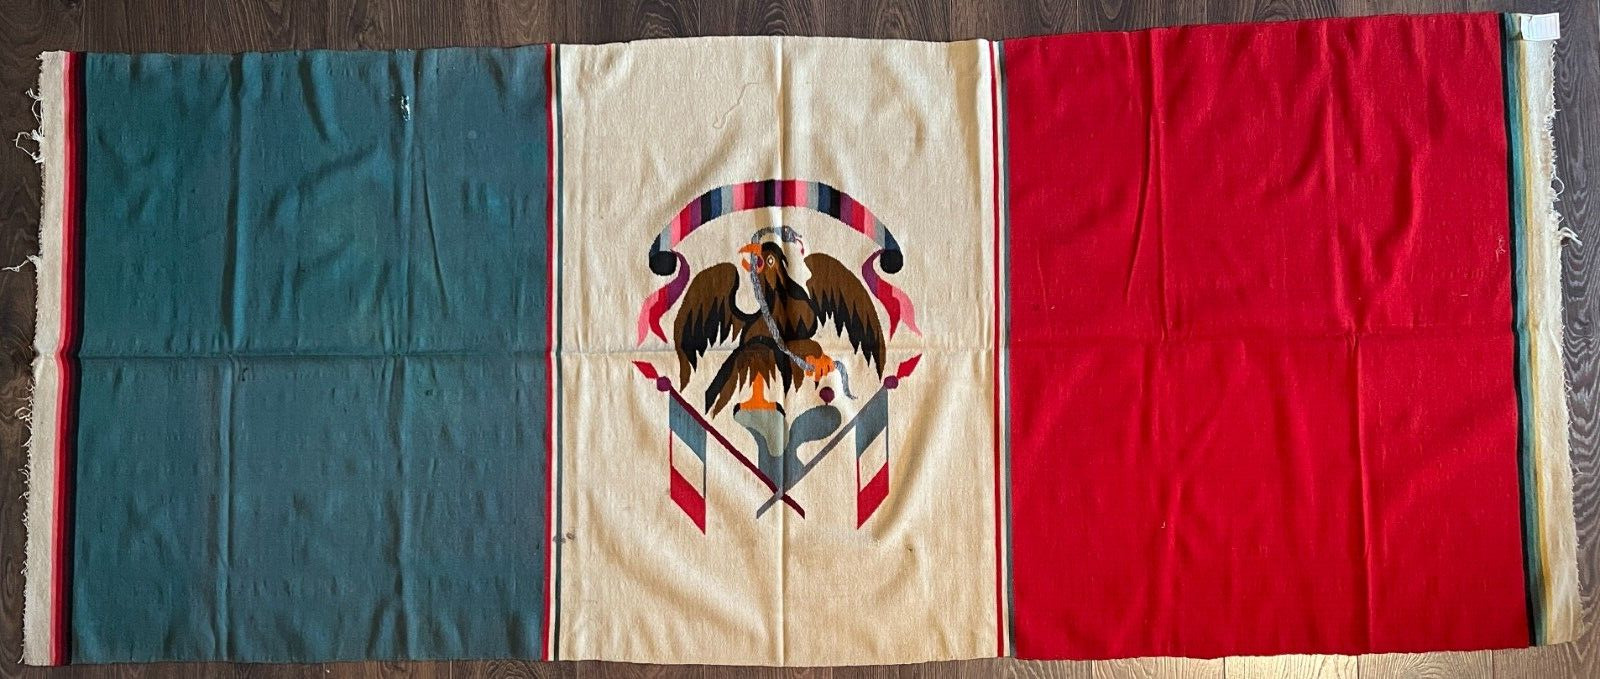 Large Antique 1930s Mexican National Flag Blanket Rug Tapestry, 91 x 37 inches